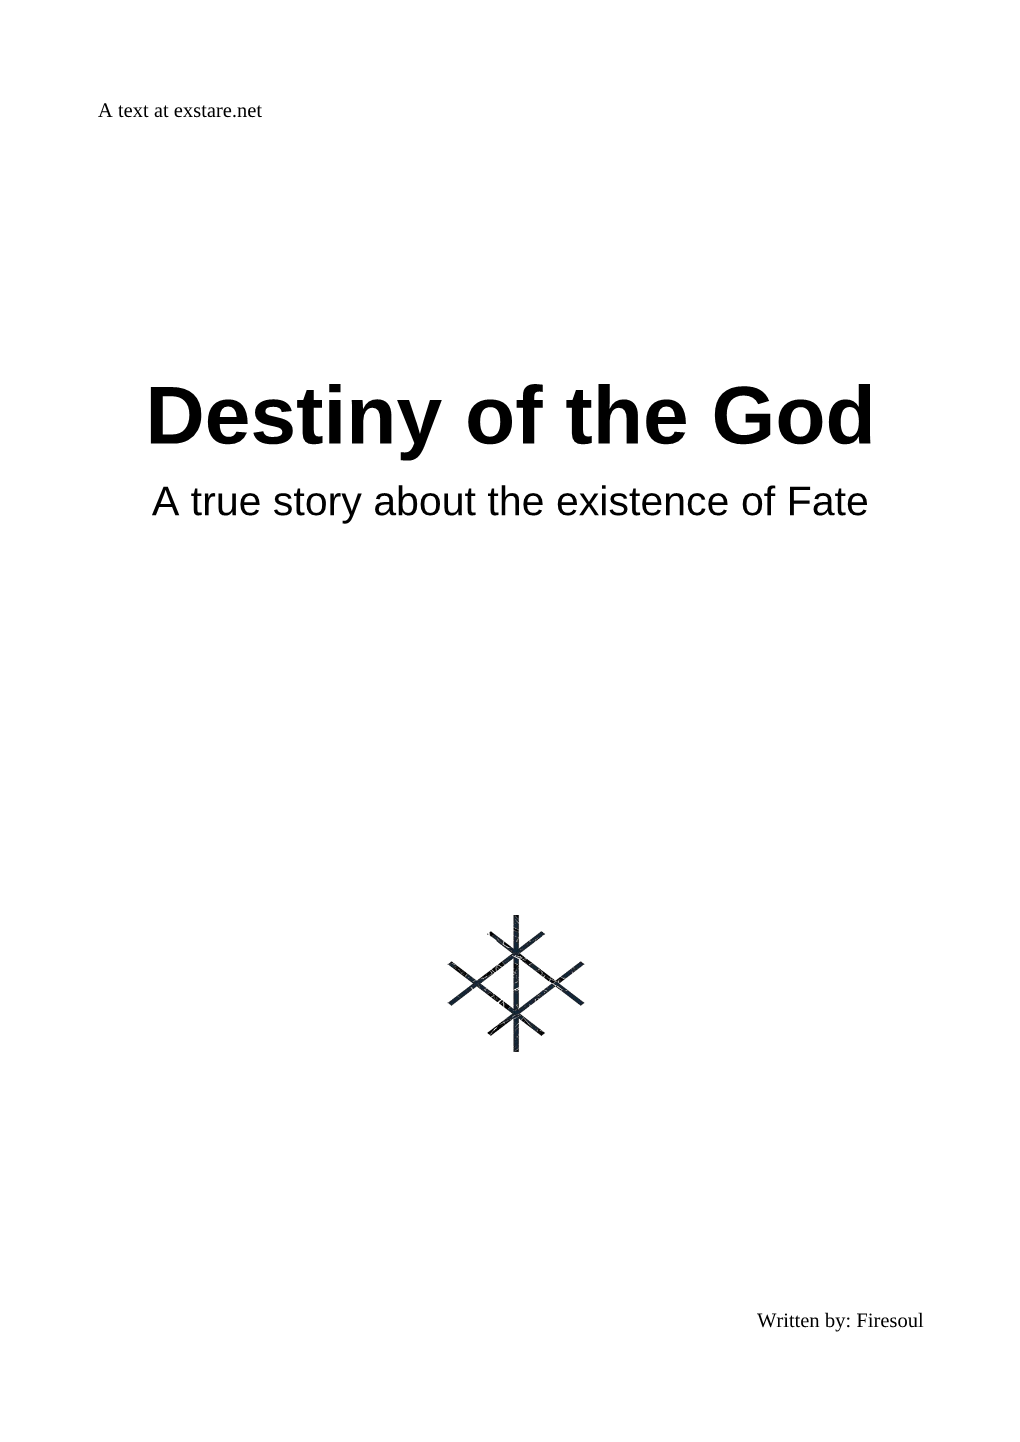 Destiny of the God a True Story About the Existence of Fate